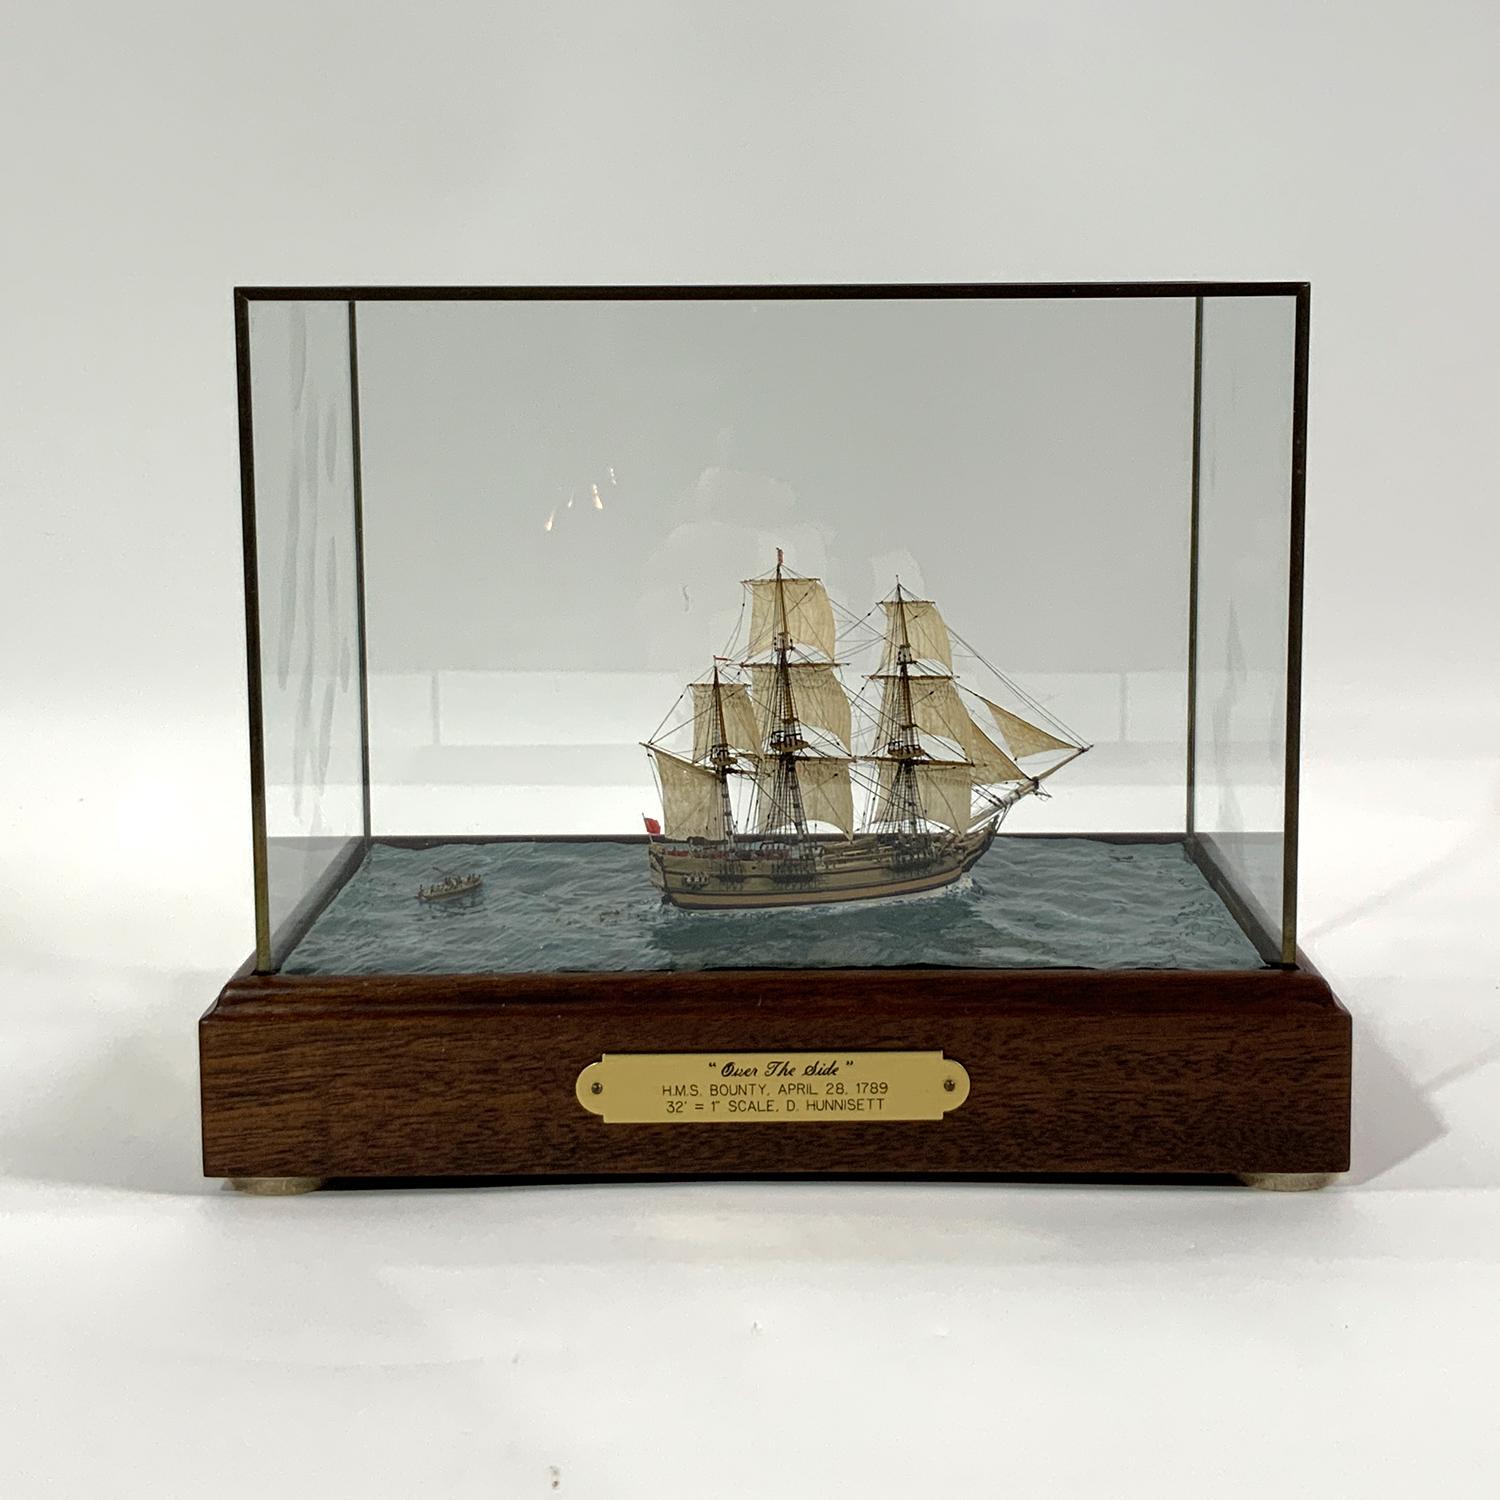 Extreme miniature ship model with engraved title plate that reads:
